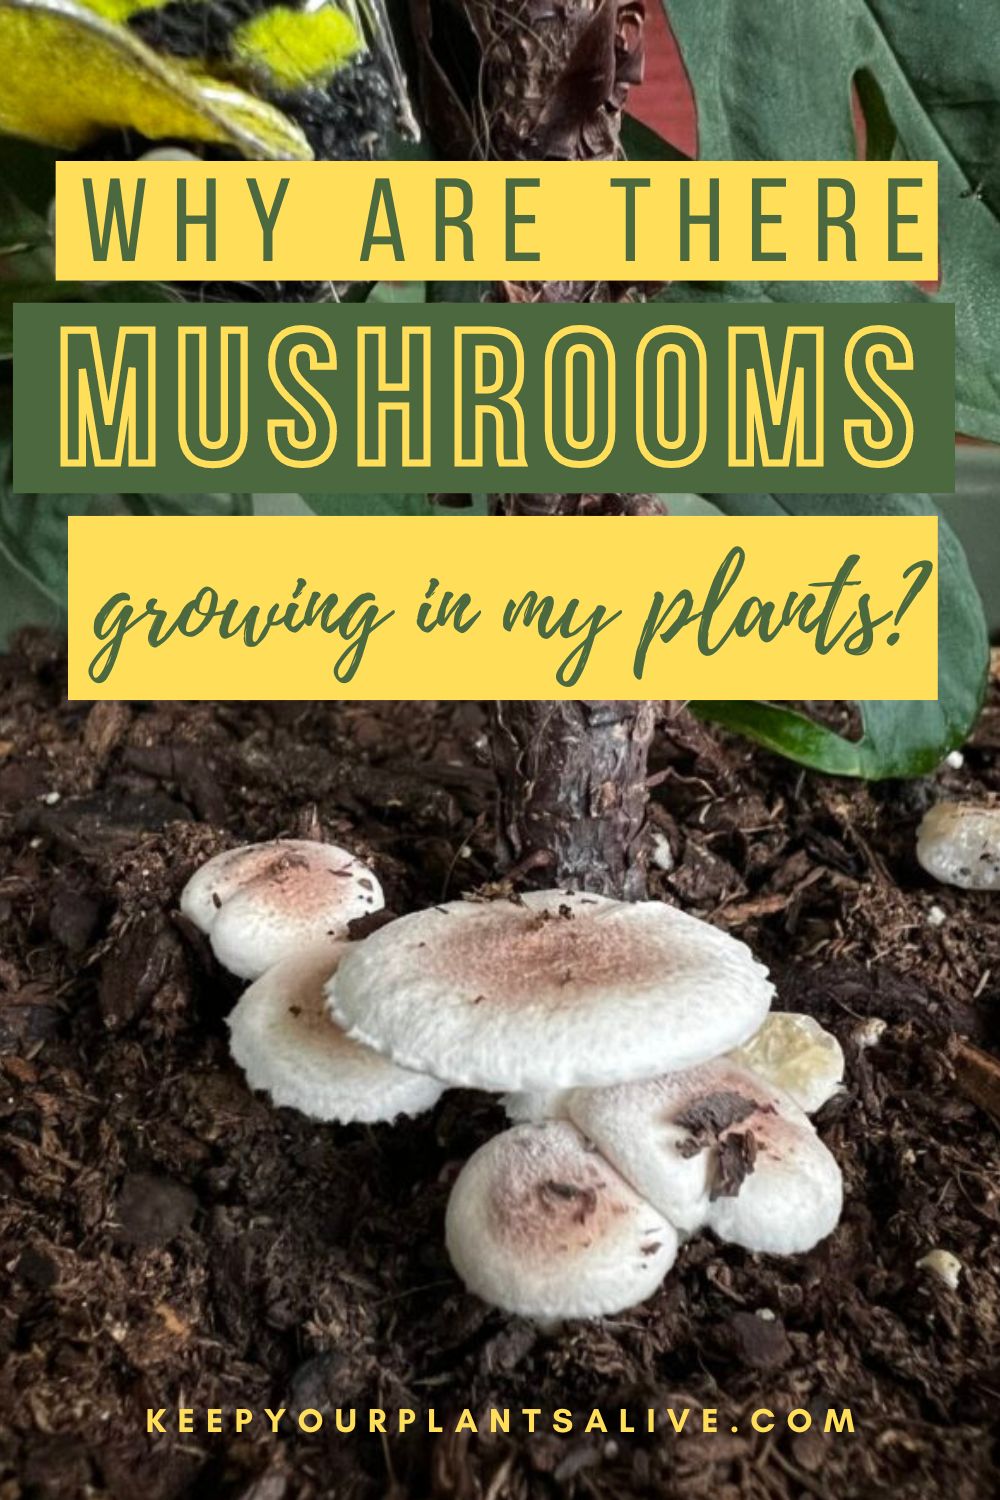 What does it mean when mushrooms grow in your plants?